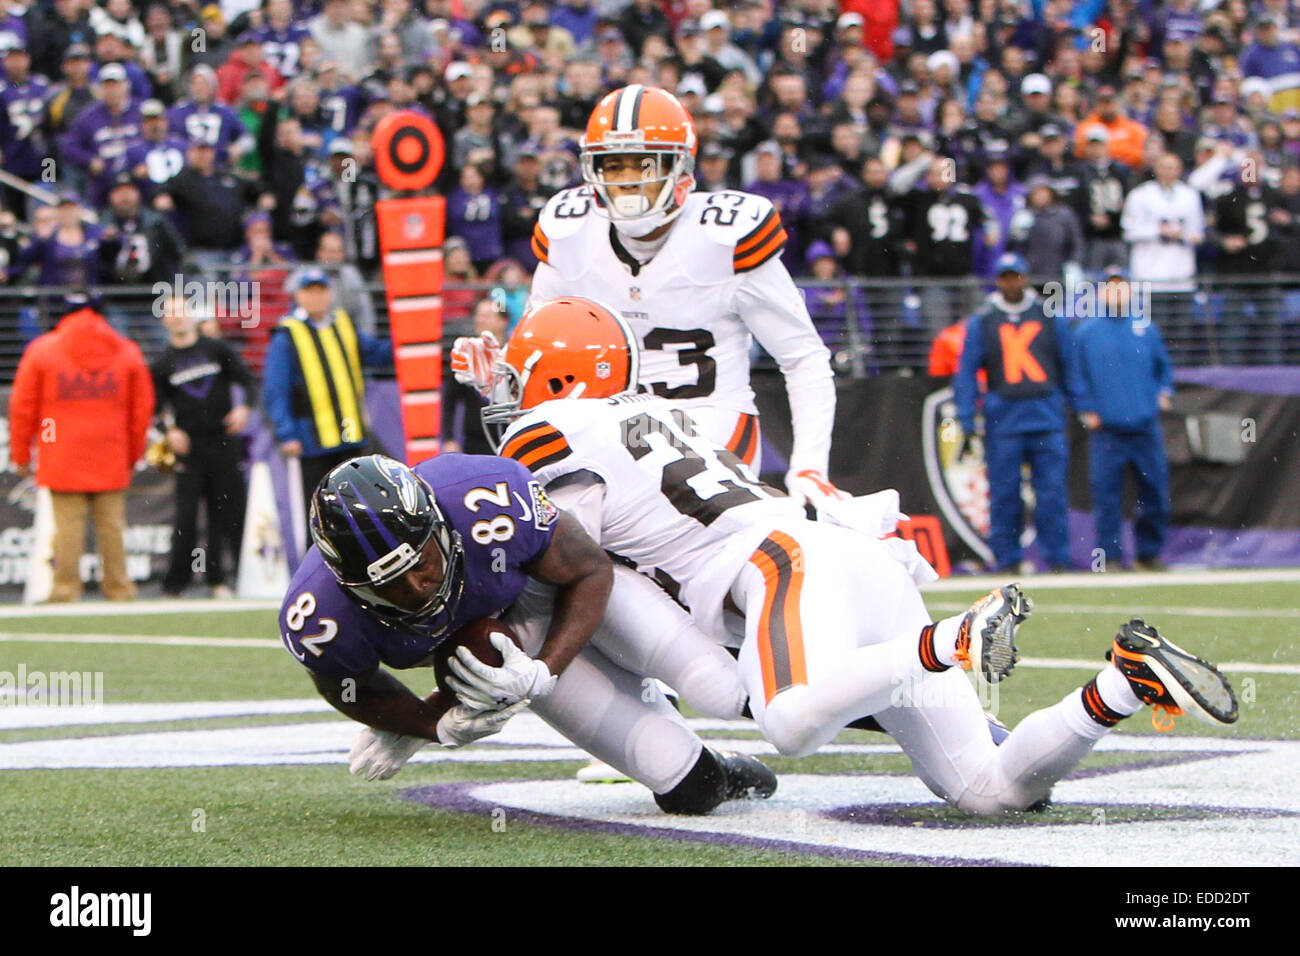 Baltimore, Maryland, USA. 28th Dec, 2014. Baltimore Ravens wide receiver Torrey Smith (82) catches a pass in the endzone as Cleveland Browns defensive back Buster Skrine (22) defends on December 28, 2014 at M&T Bank Stadium. © Debby Wong/ZUMA Wire/Alamy Live News Stock Photo